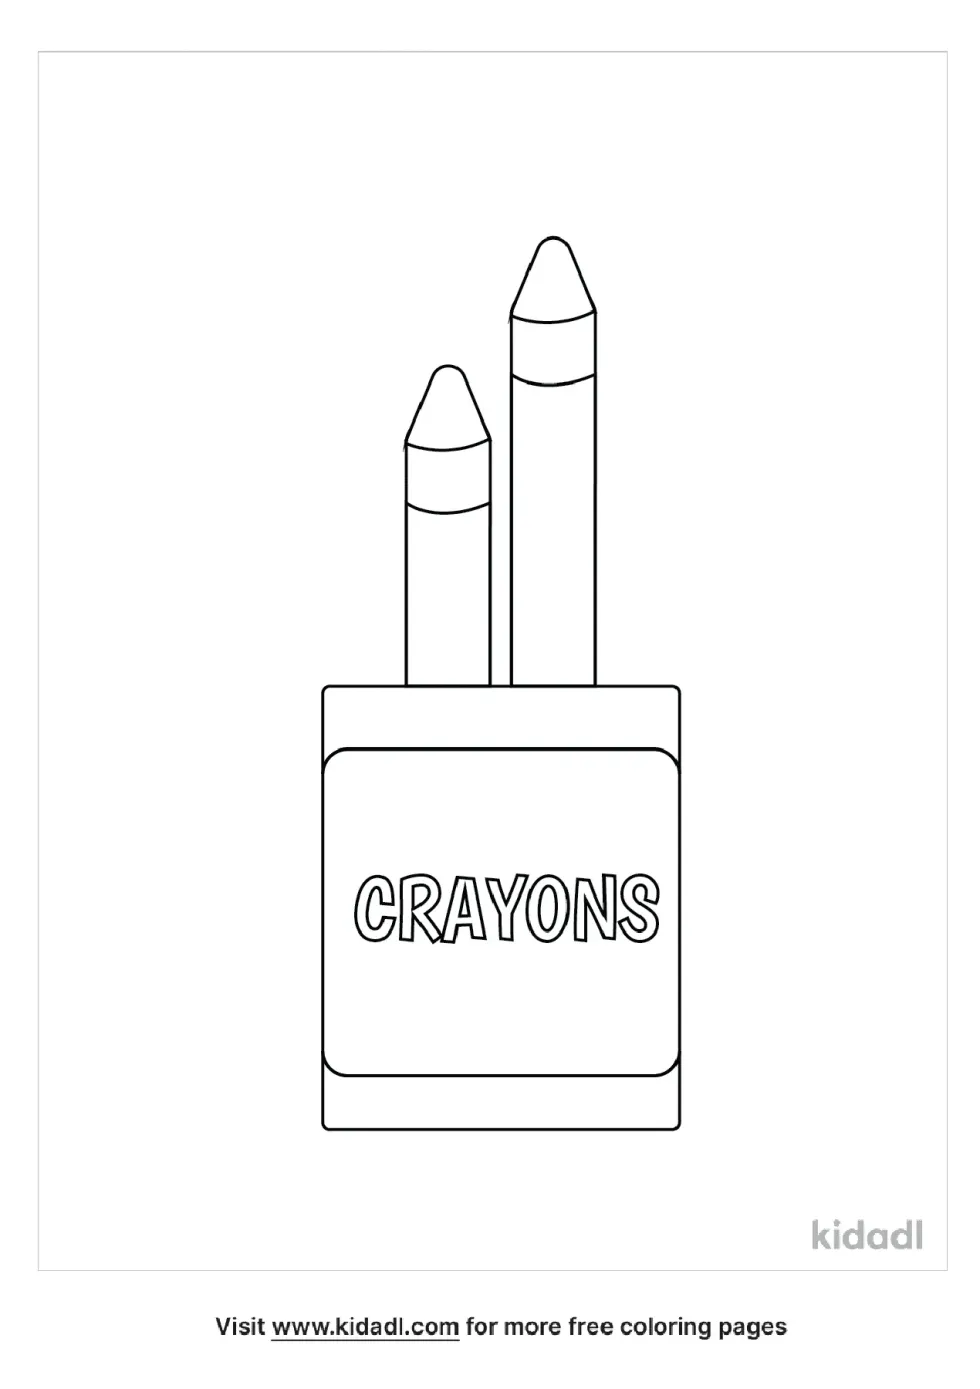 2 Crayons Coloring Page